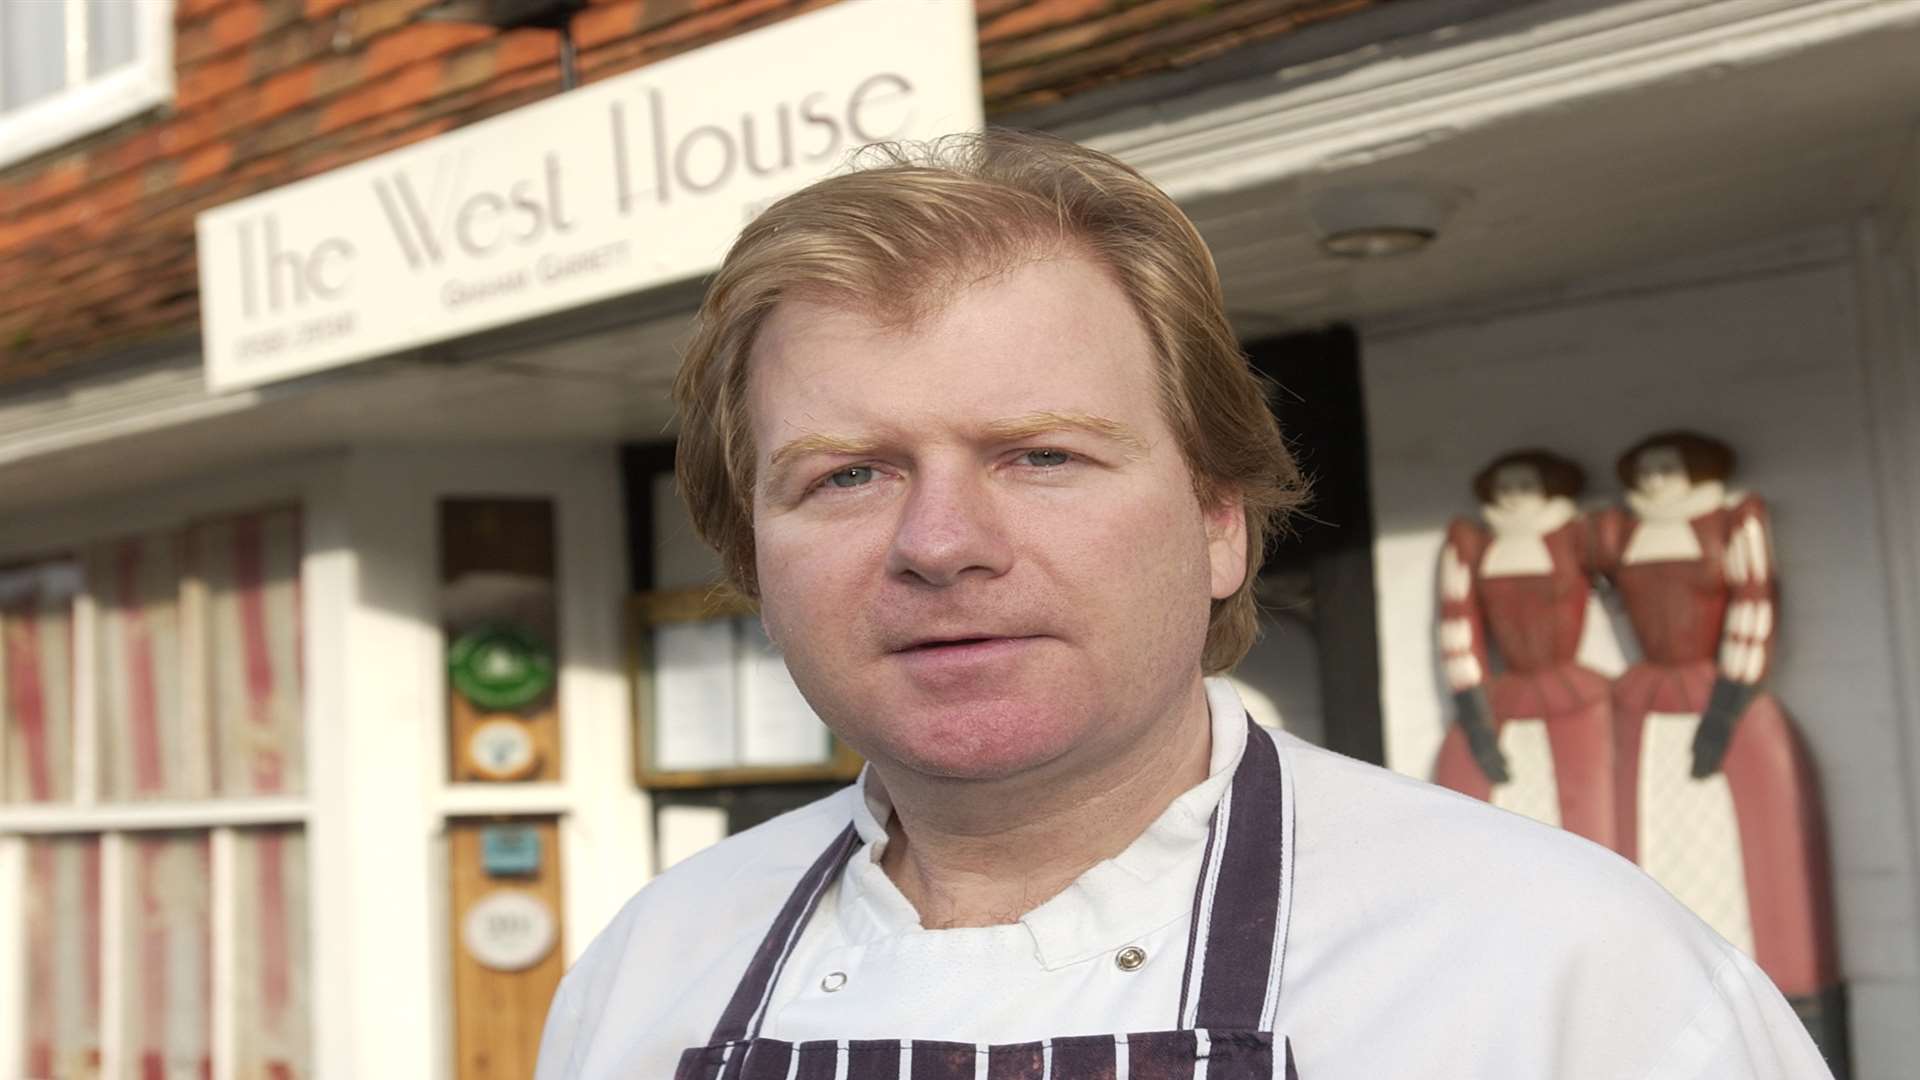 Graham Garrett at the West House holds a Michelin star